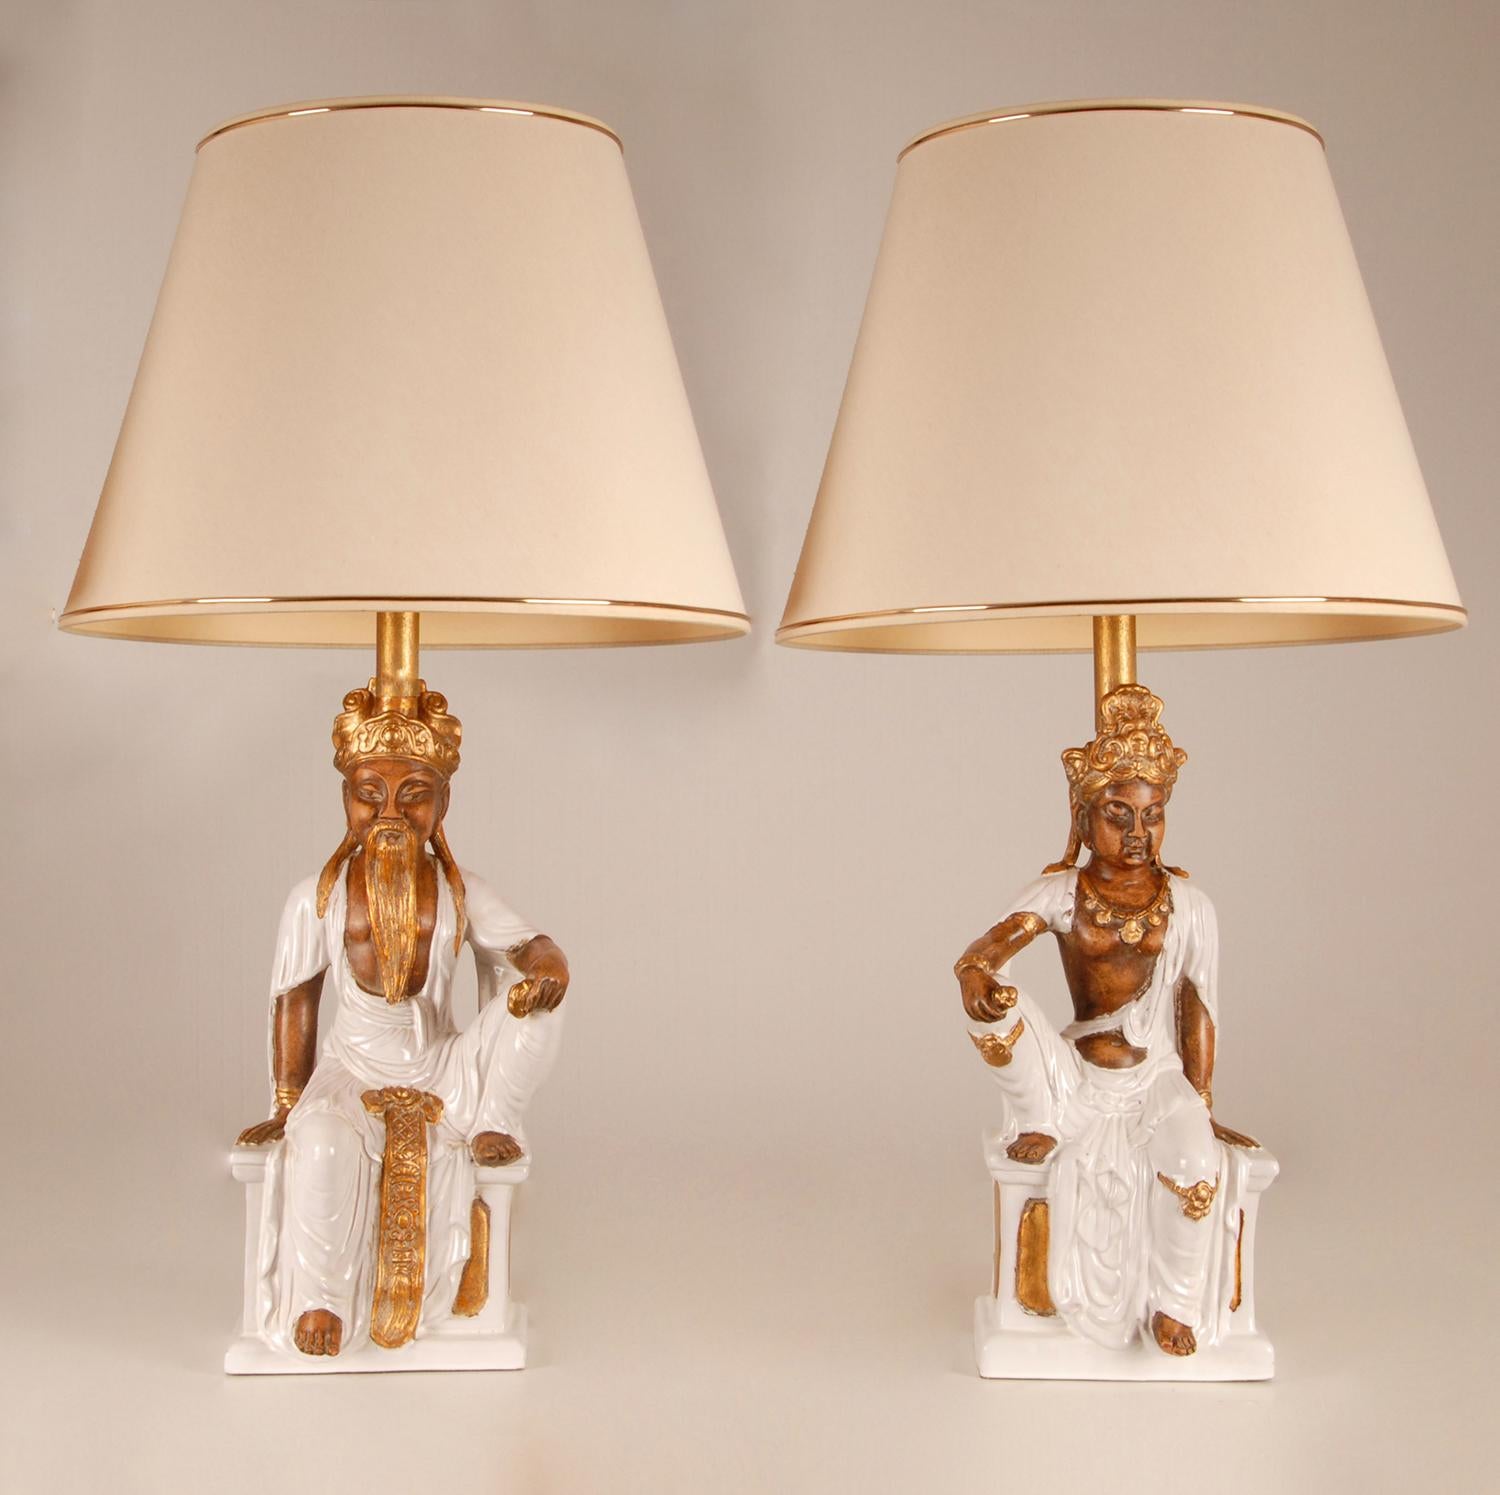 Merk: table lamps Chinese Buddha figures
Vintage Table Lamps Chinese Buddha figures Ceramic
Material: porcelain, ceramic, pottery
Design: Ugo Zaccagnini
Producer: Zaccagnini
Origin: Italy, 1960
Style: Vintage, Mid century, Chinoiserie - two Chinese